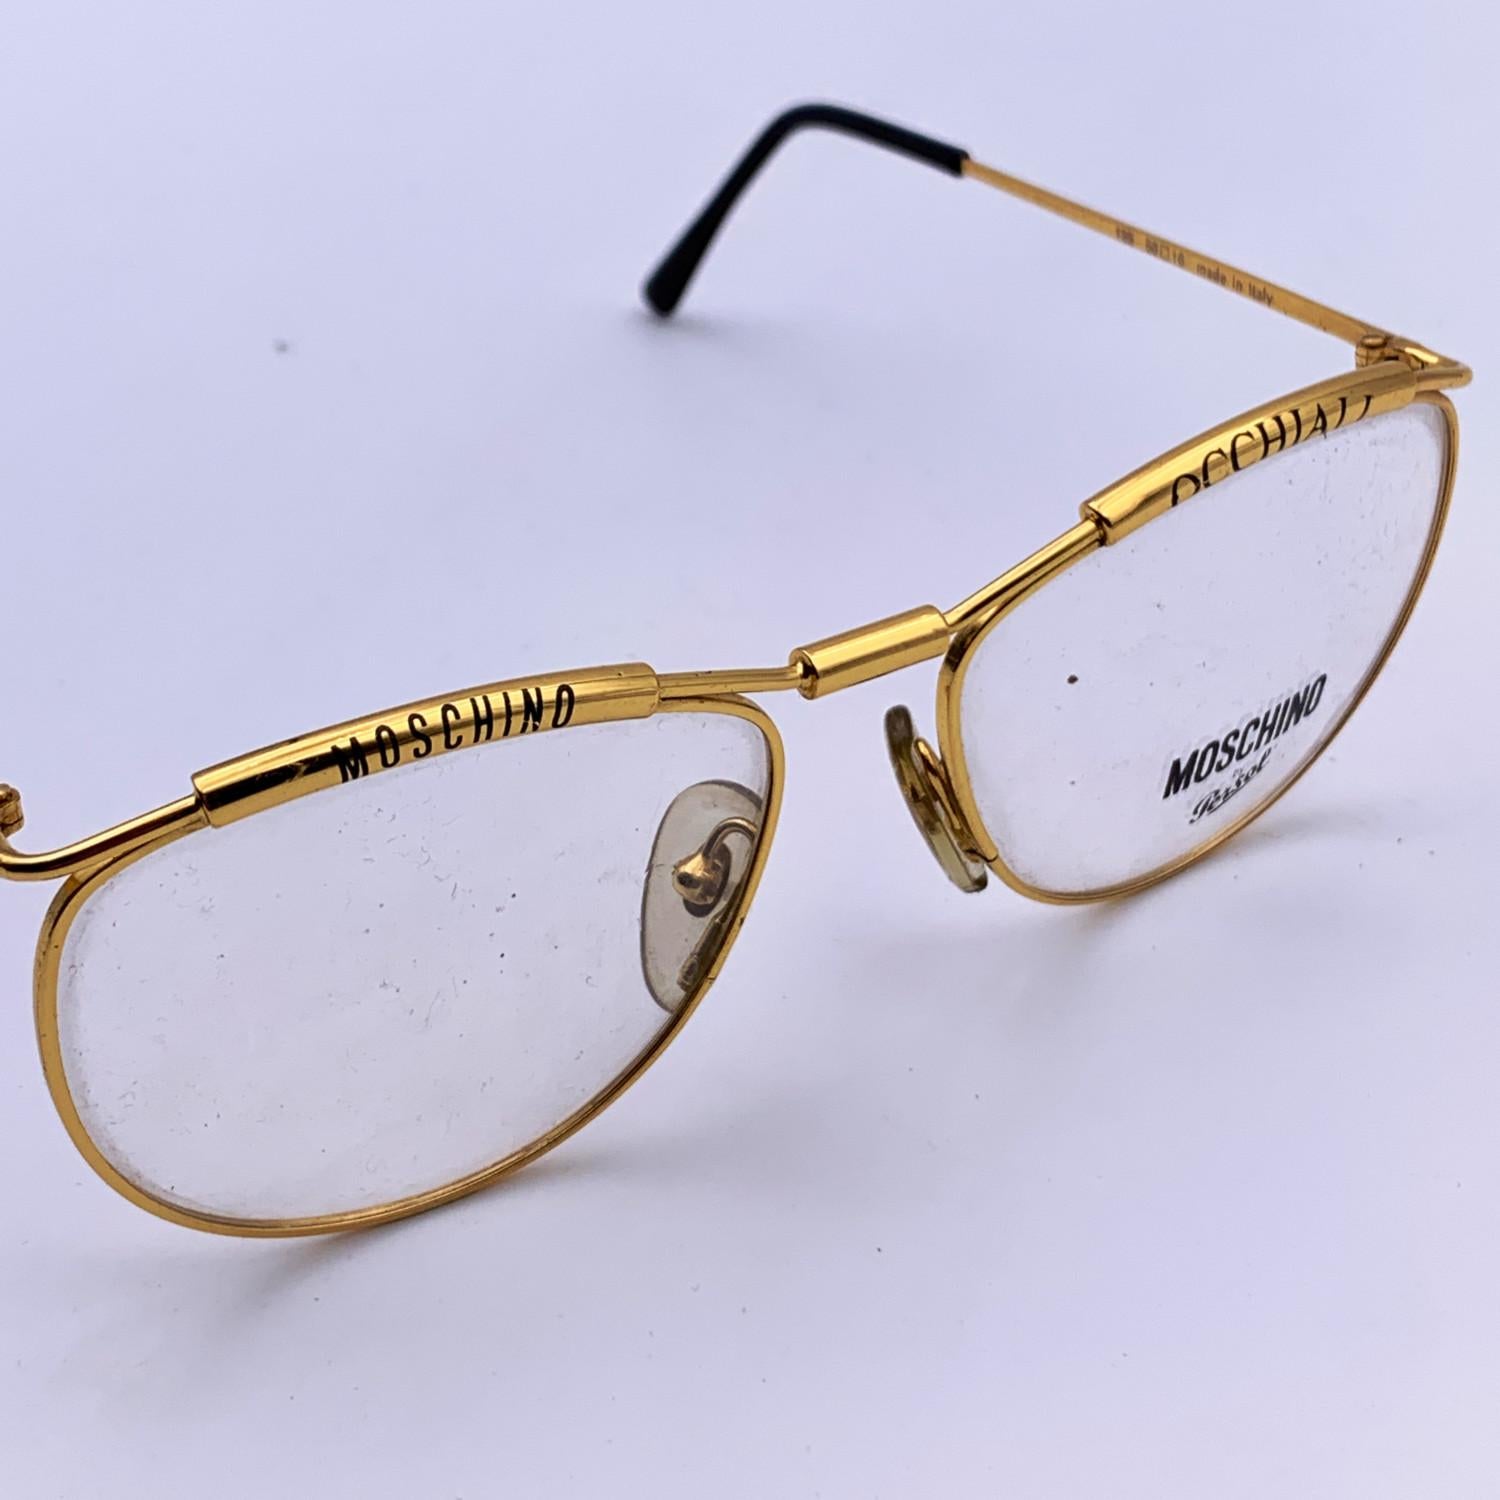 Moschino by Persol Vintage Gold Metal Eyeglasses mod. M18 56/18 135mm In Excellent Condition In Rome, Rome